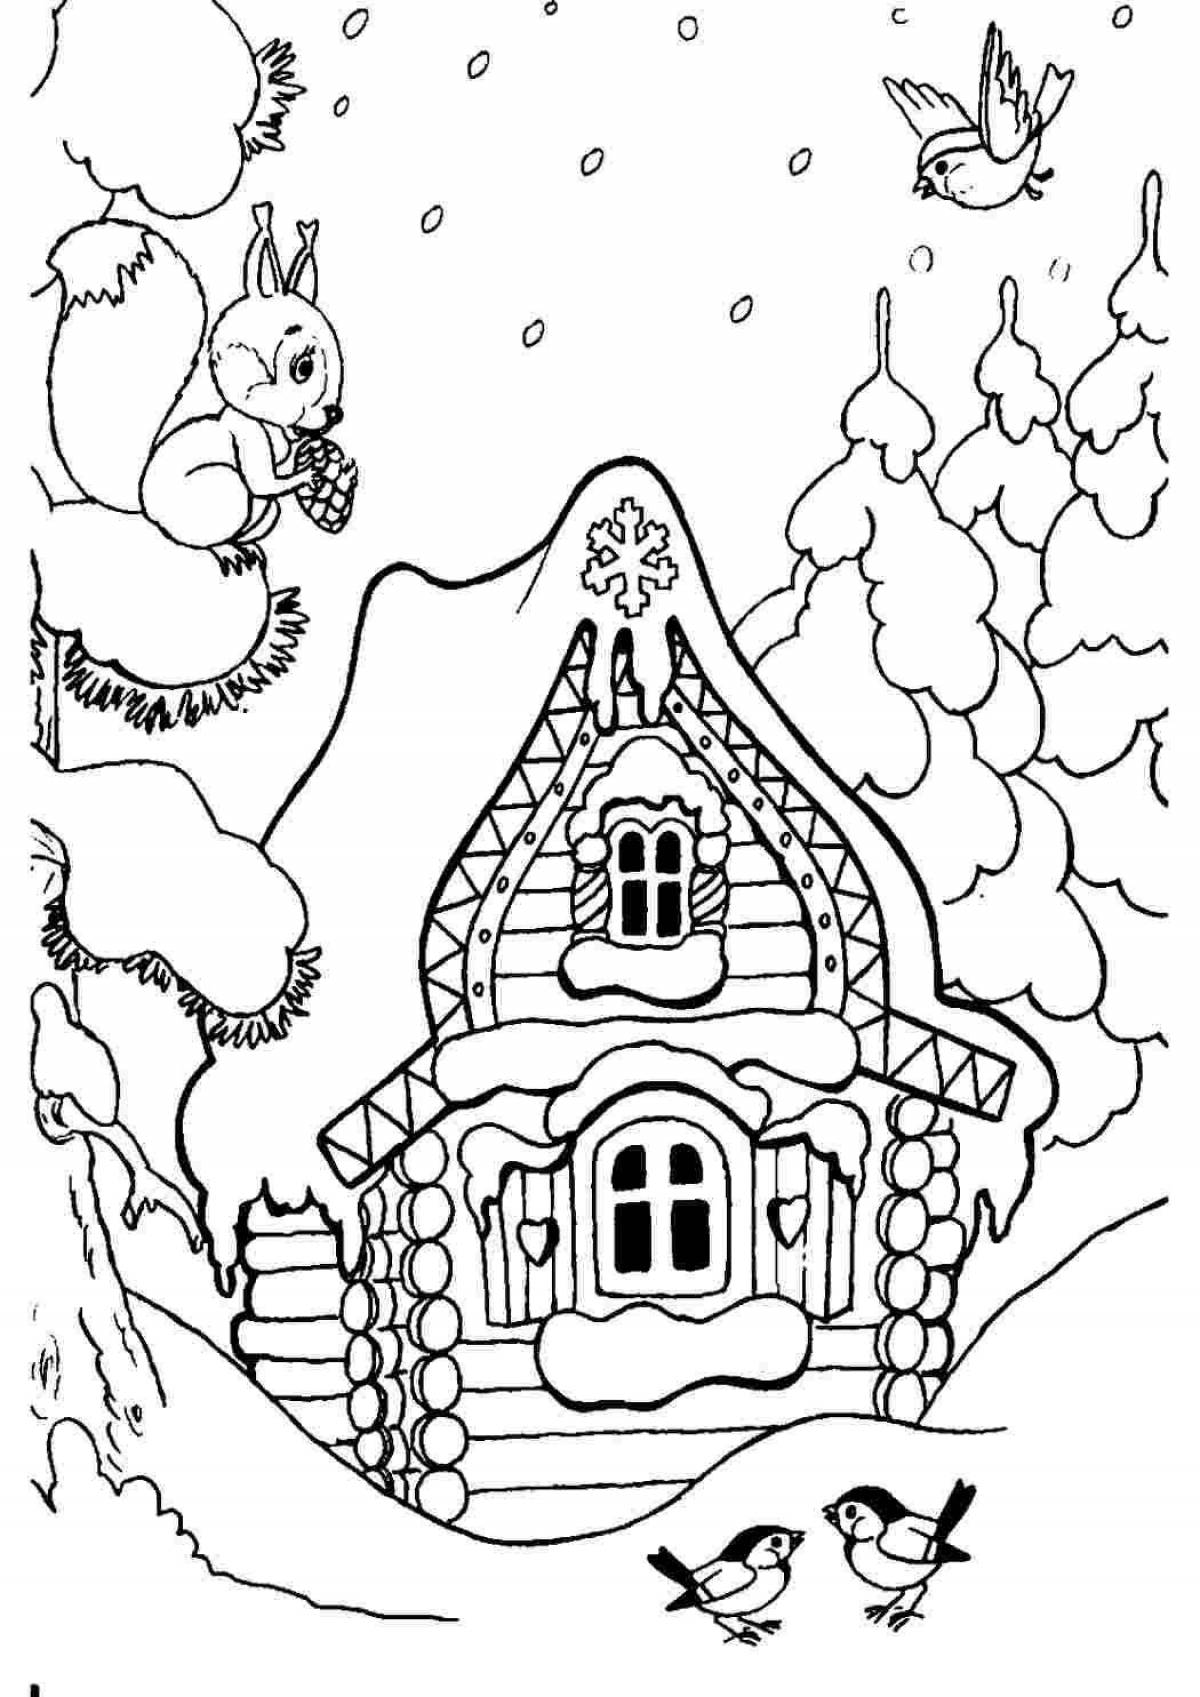 Exciting coloring cabin in the forest